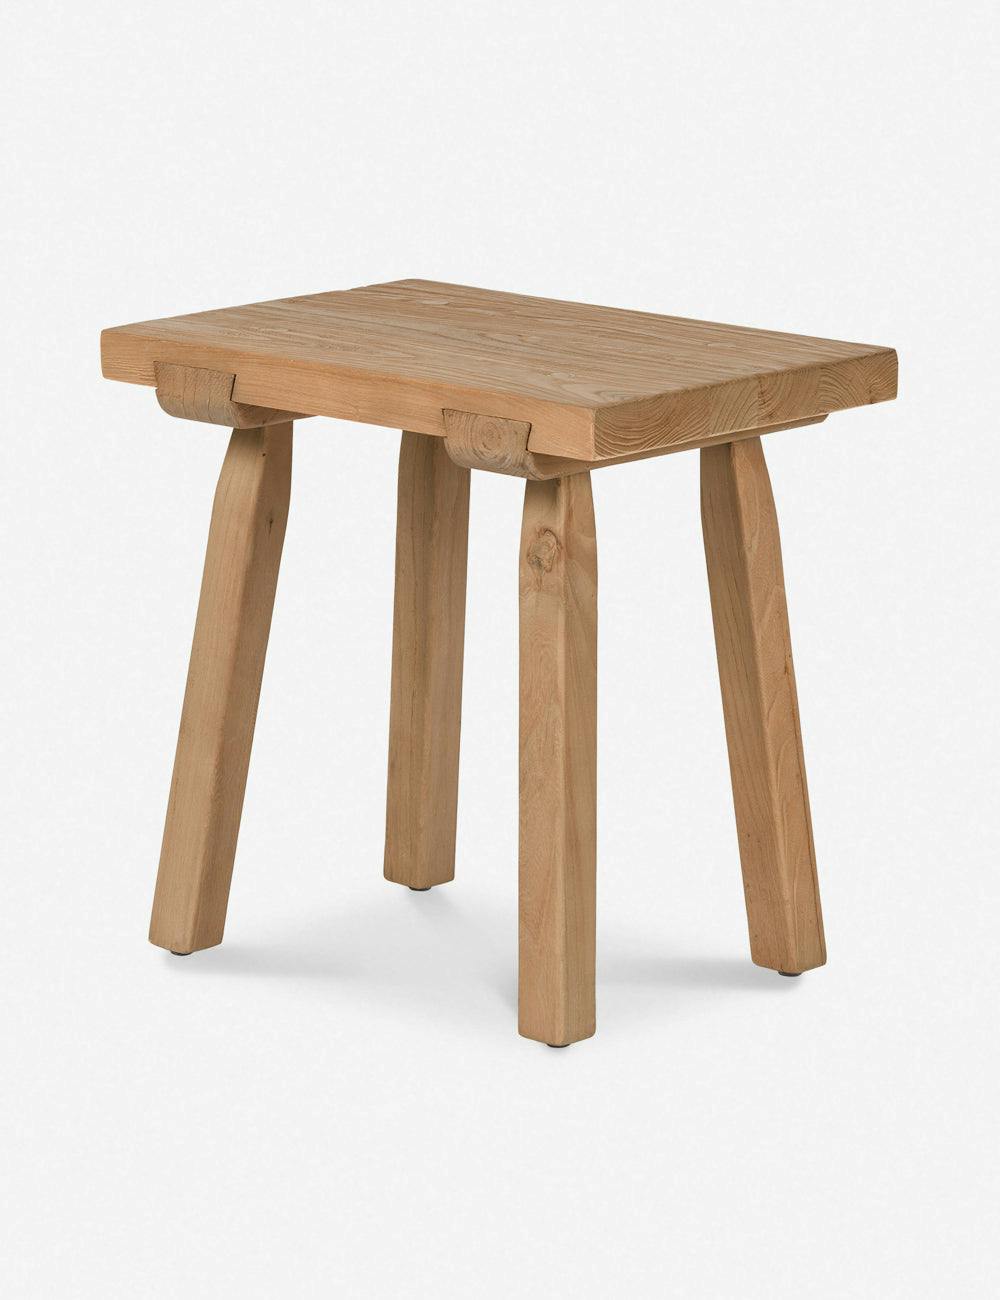 Rustic Elmwood Tapered Leg French Farmhouse Stool - Natural